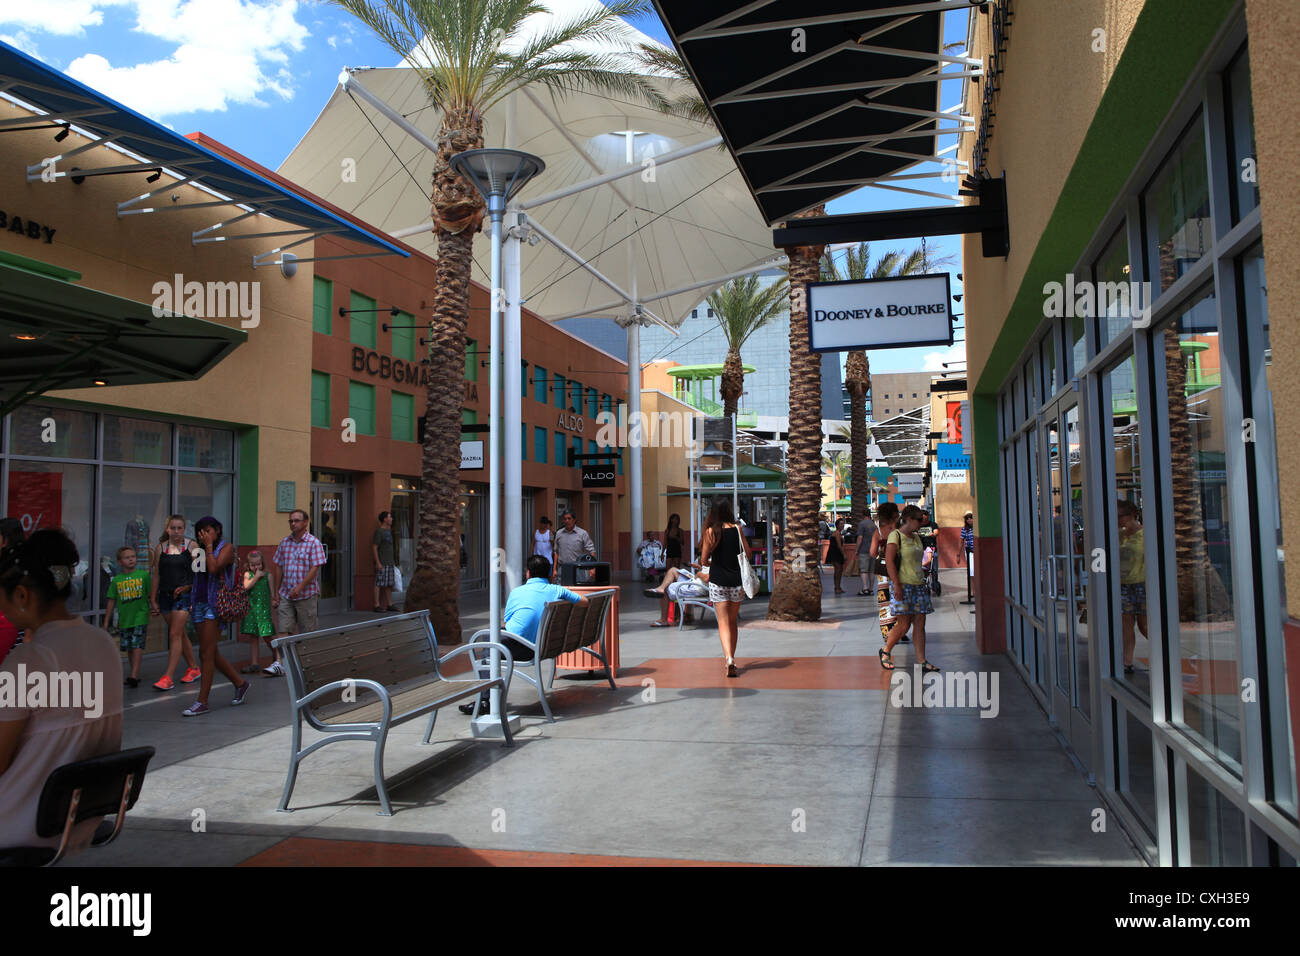 About Las Vegas North Premium Outlets® - A Shopping Center in Las